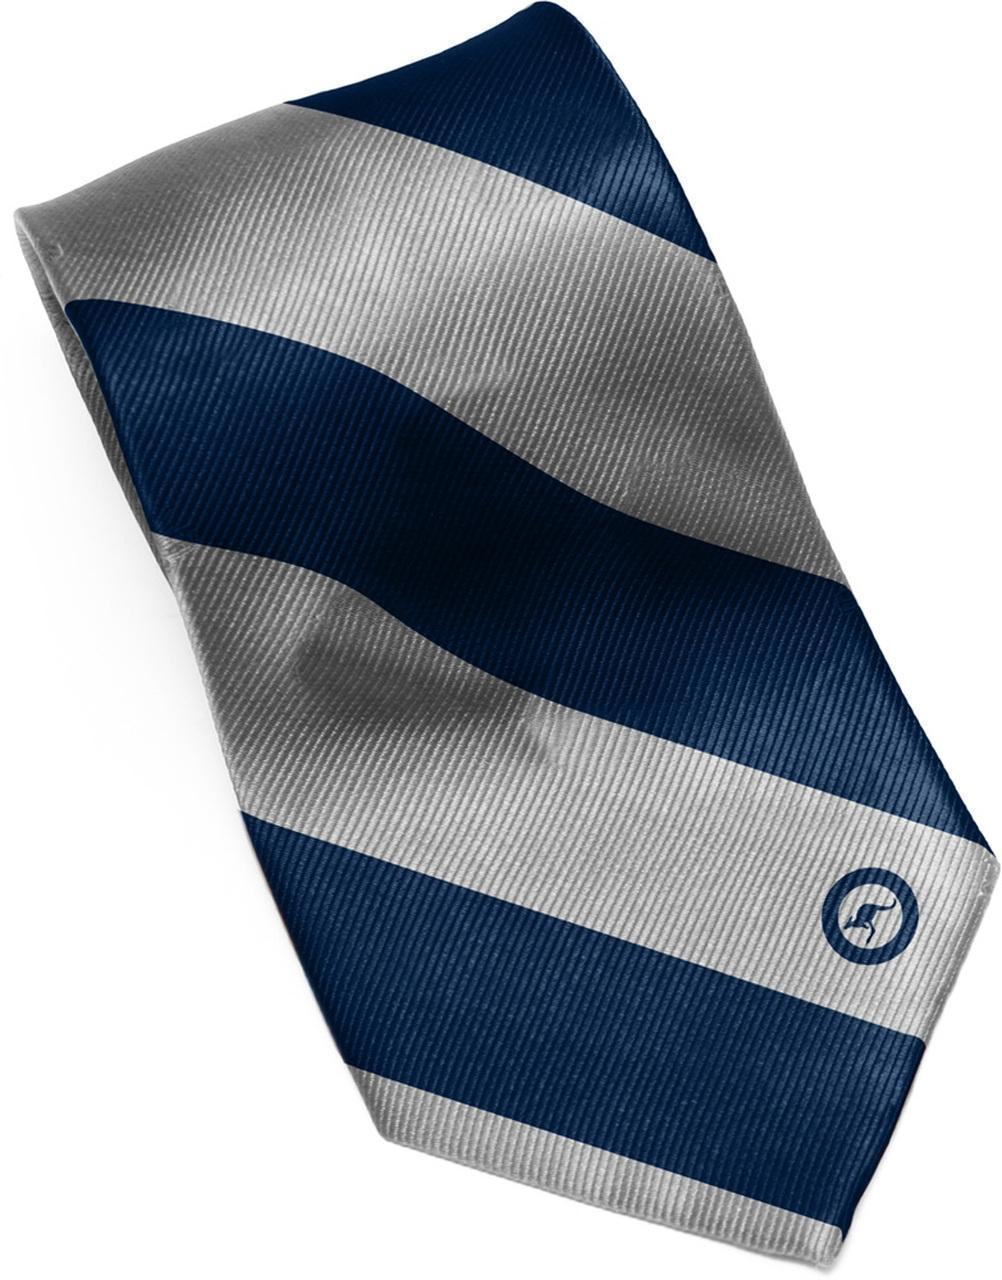 The Royal Australian Air Force Striped Neck Dress Polyester Tie